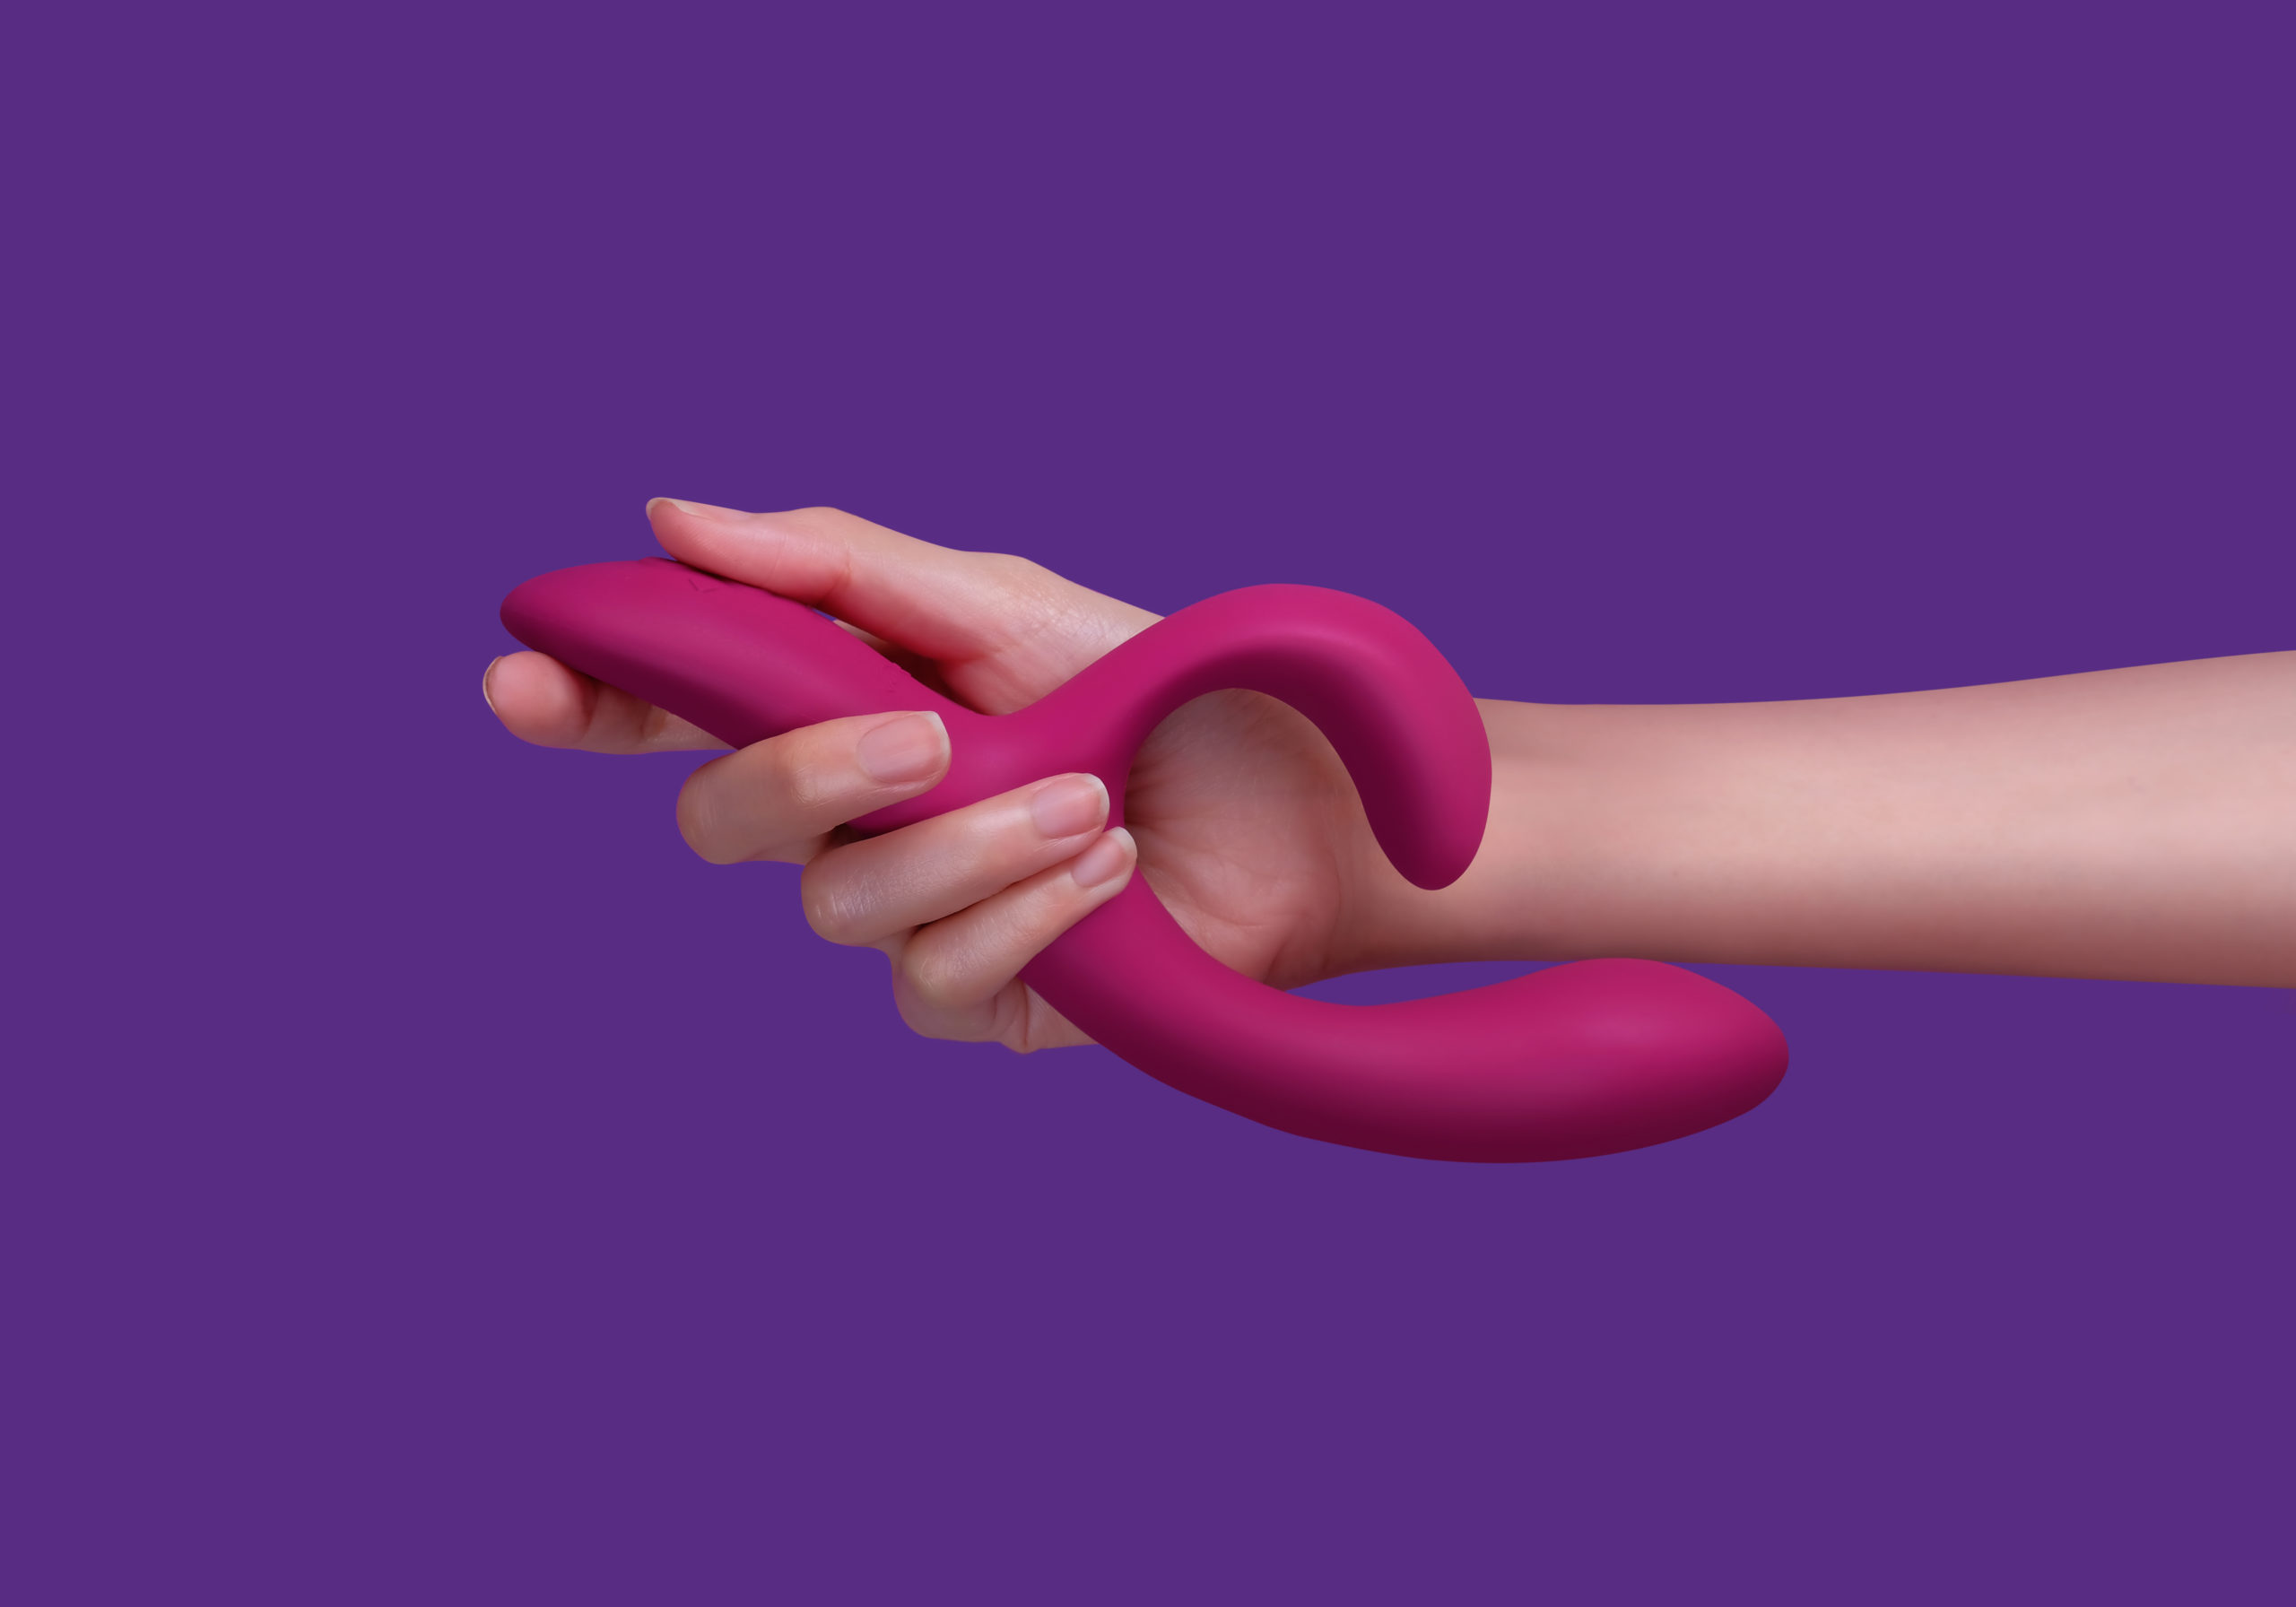 Broke up with my boyfriend. Can the We-Vibe Nova 2 help me forget?